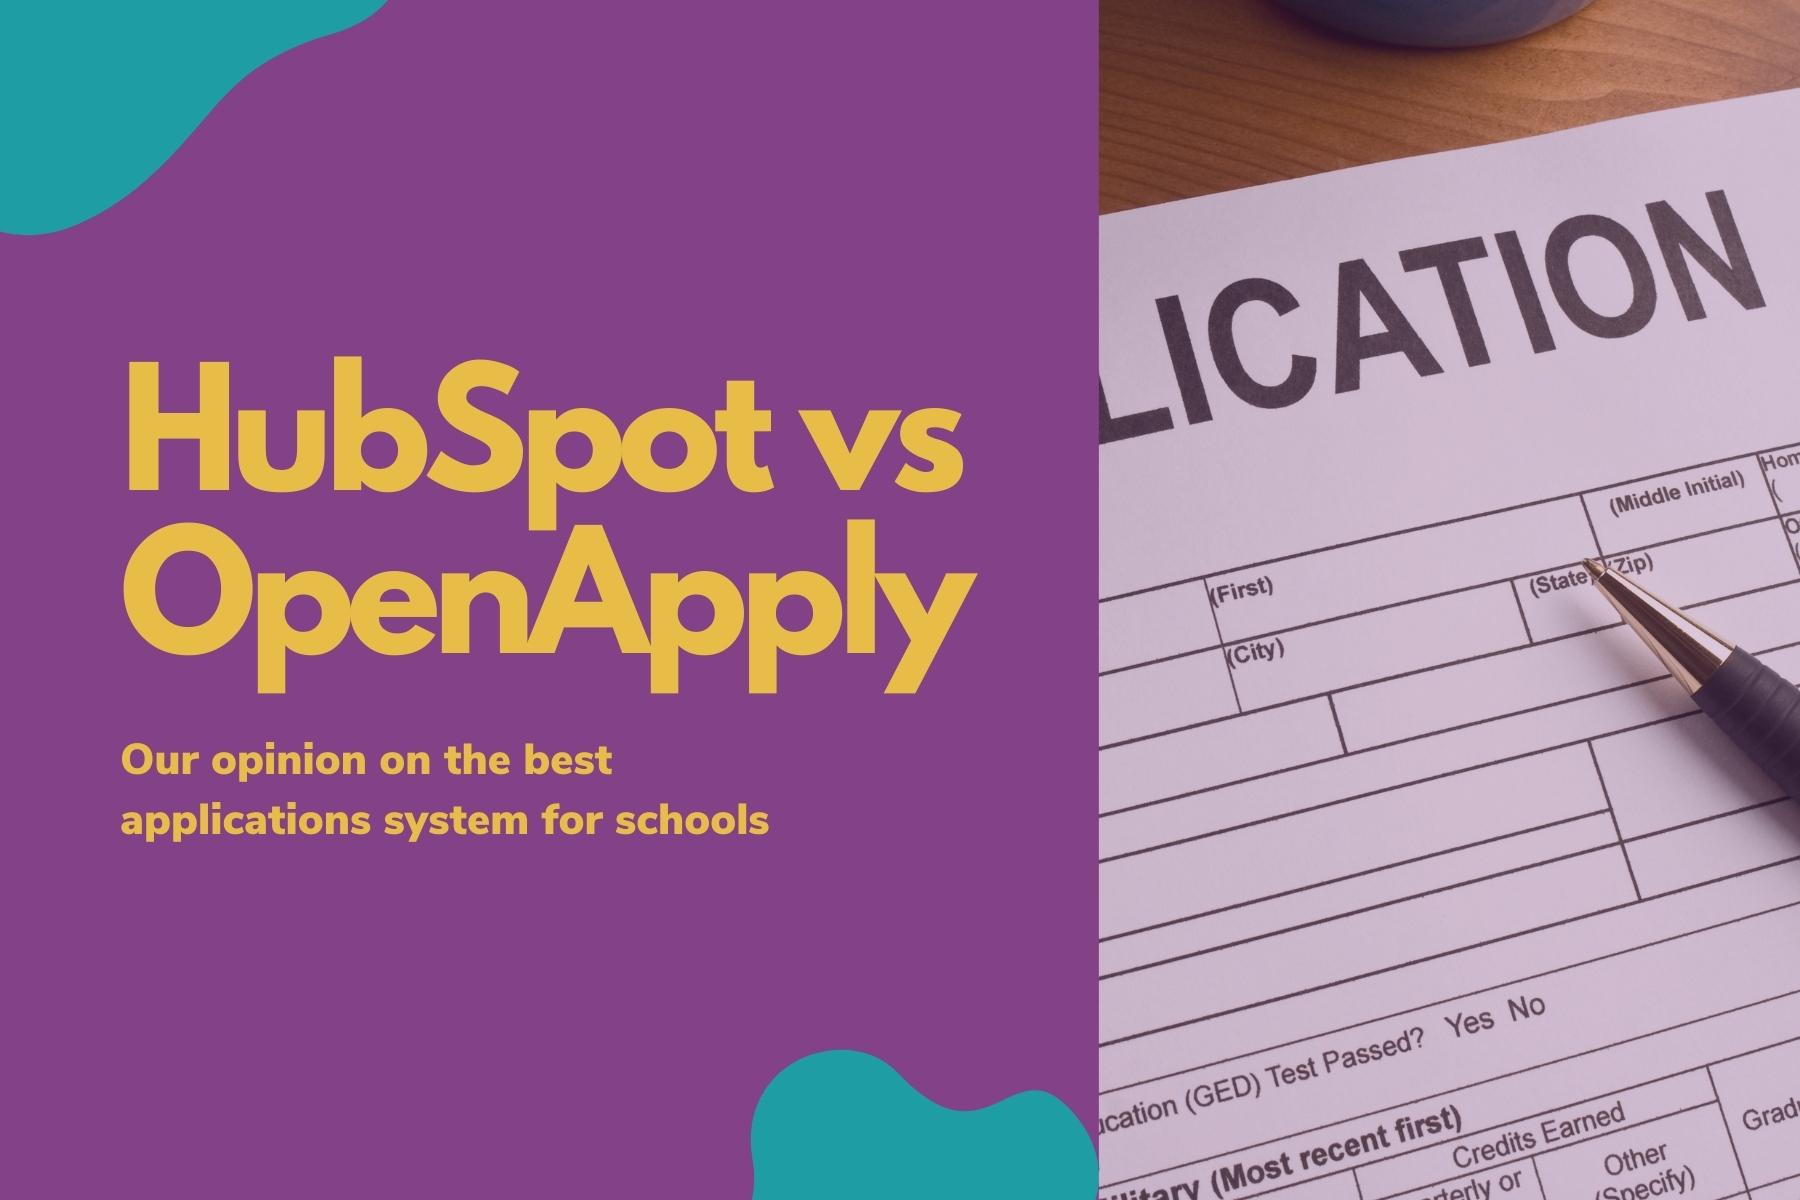 Image of school application form with 'HubSpot vs OpenApply' text